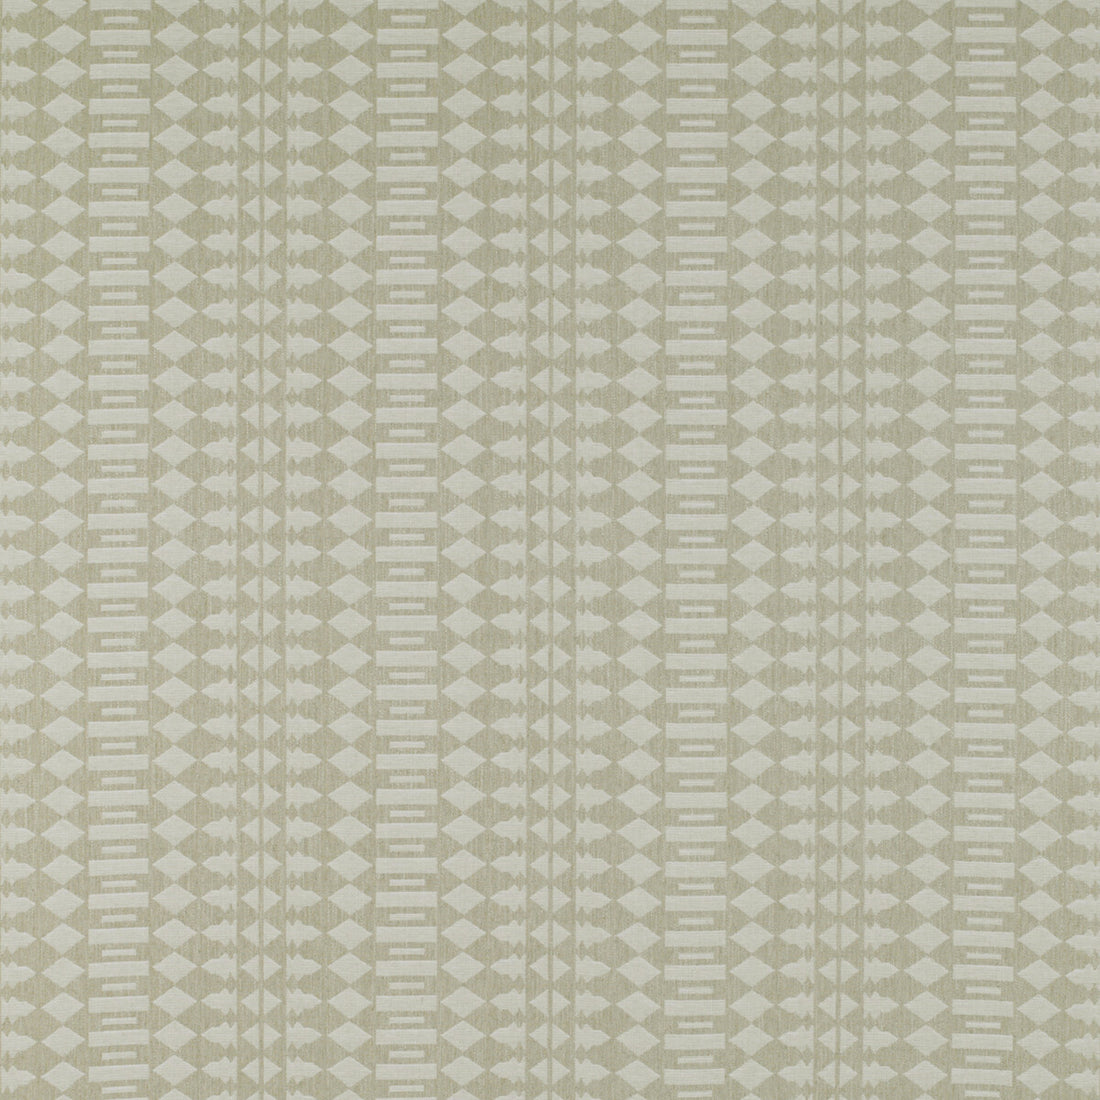 Pavia fabric in blanco color - pattern GDT5322.003.0 - by Gaston y Daniela in the Tierras collection